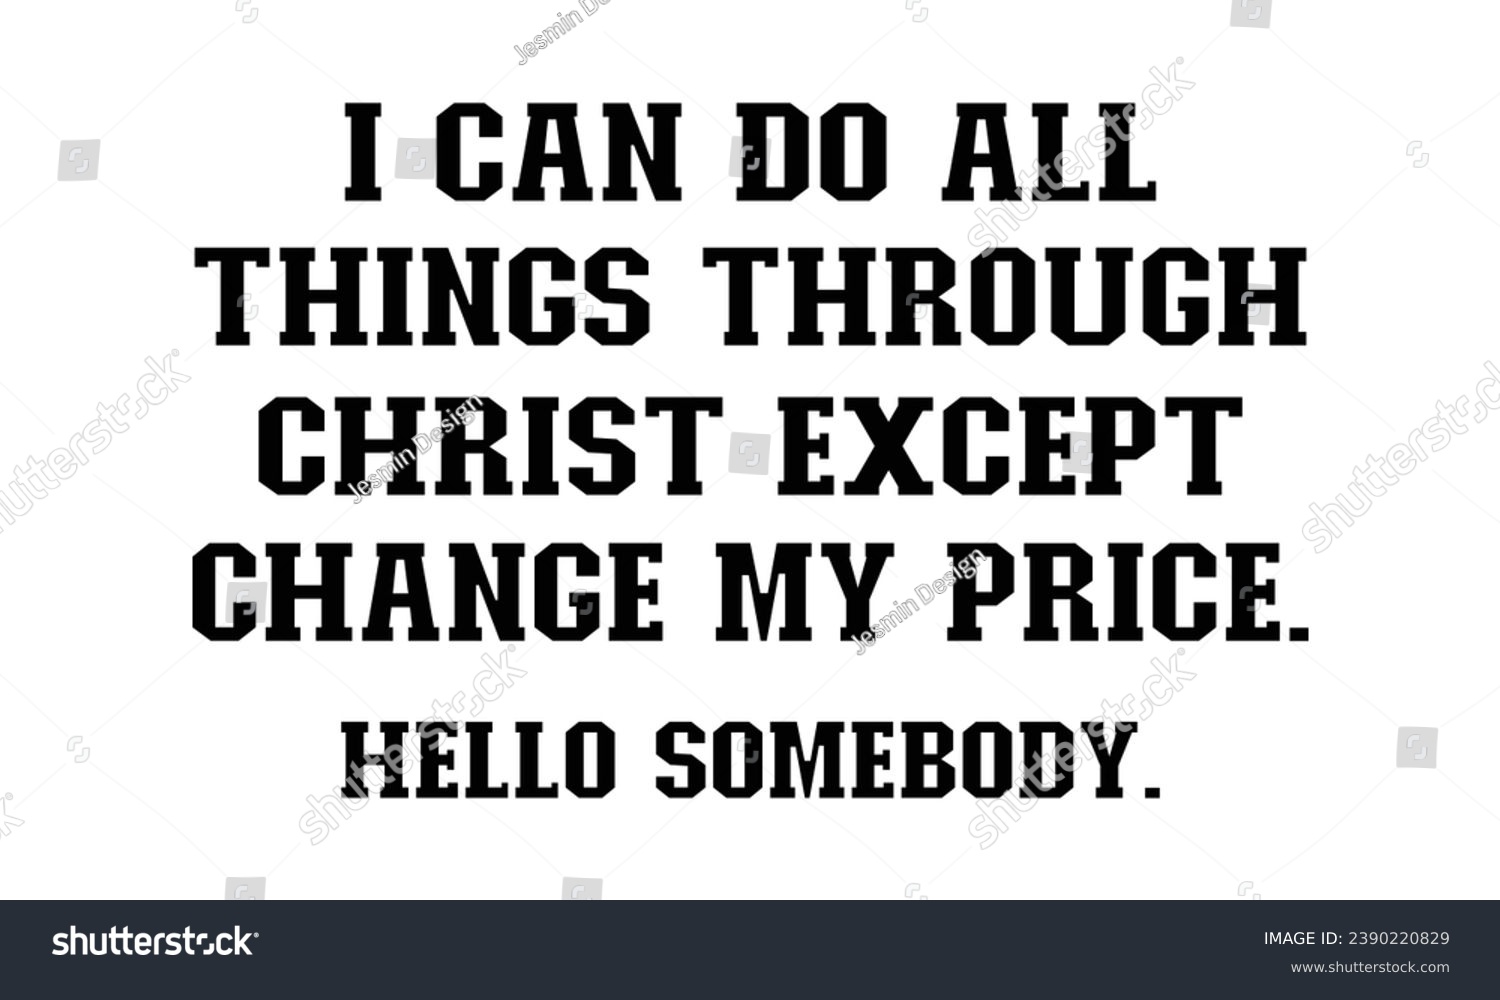 SVG of I can do all things through Christ except change my price hello somebody t-shirt design. svg